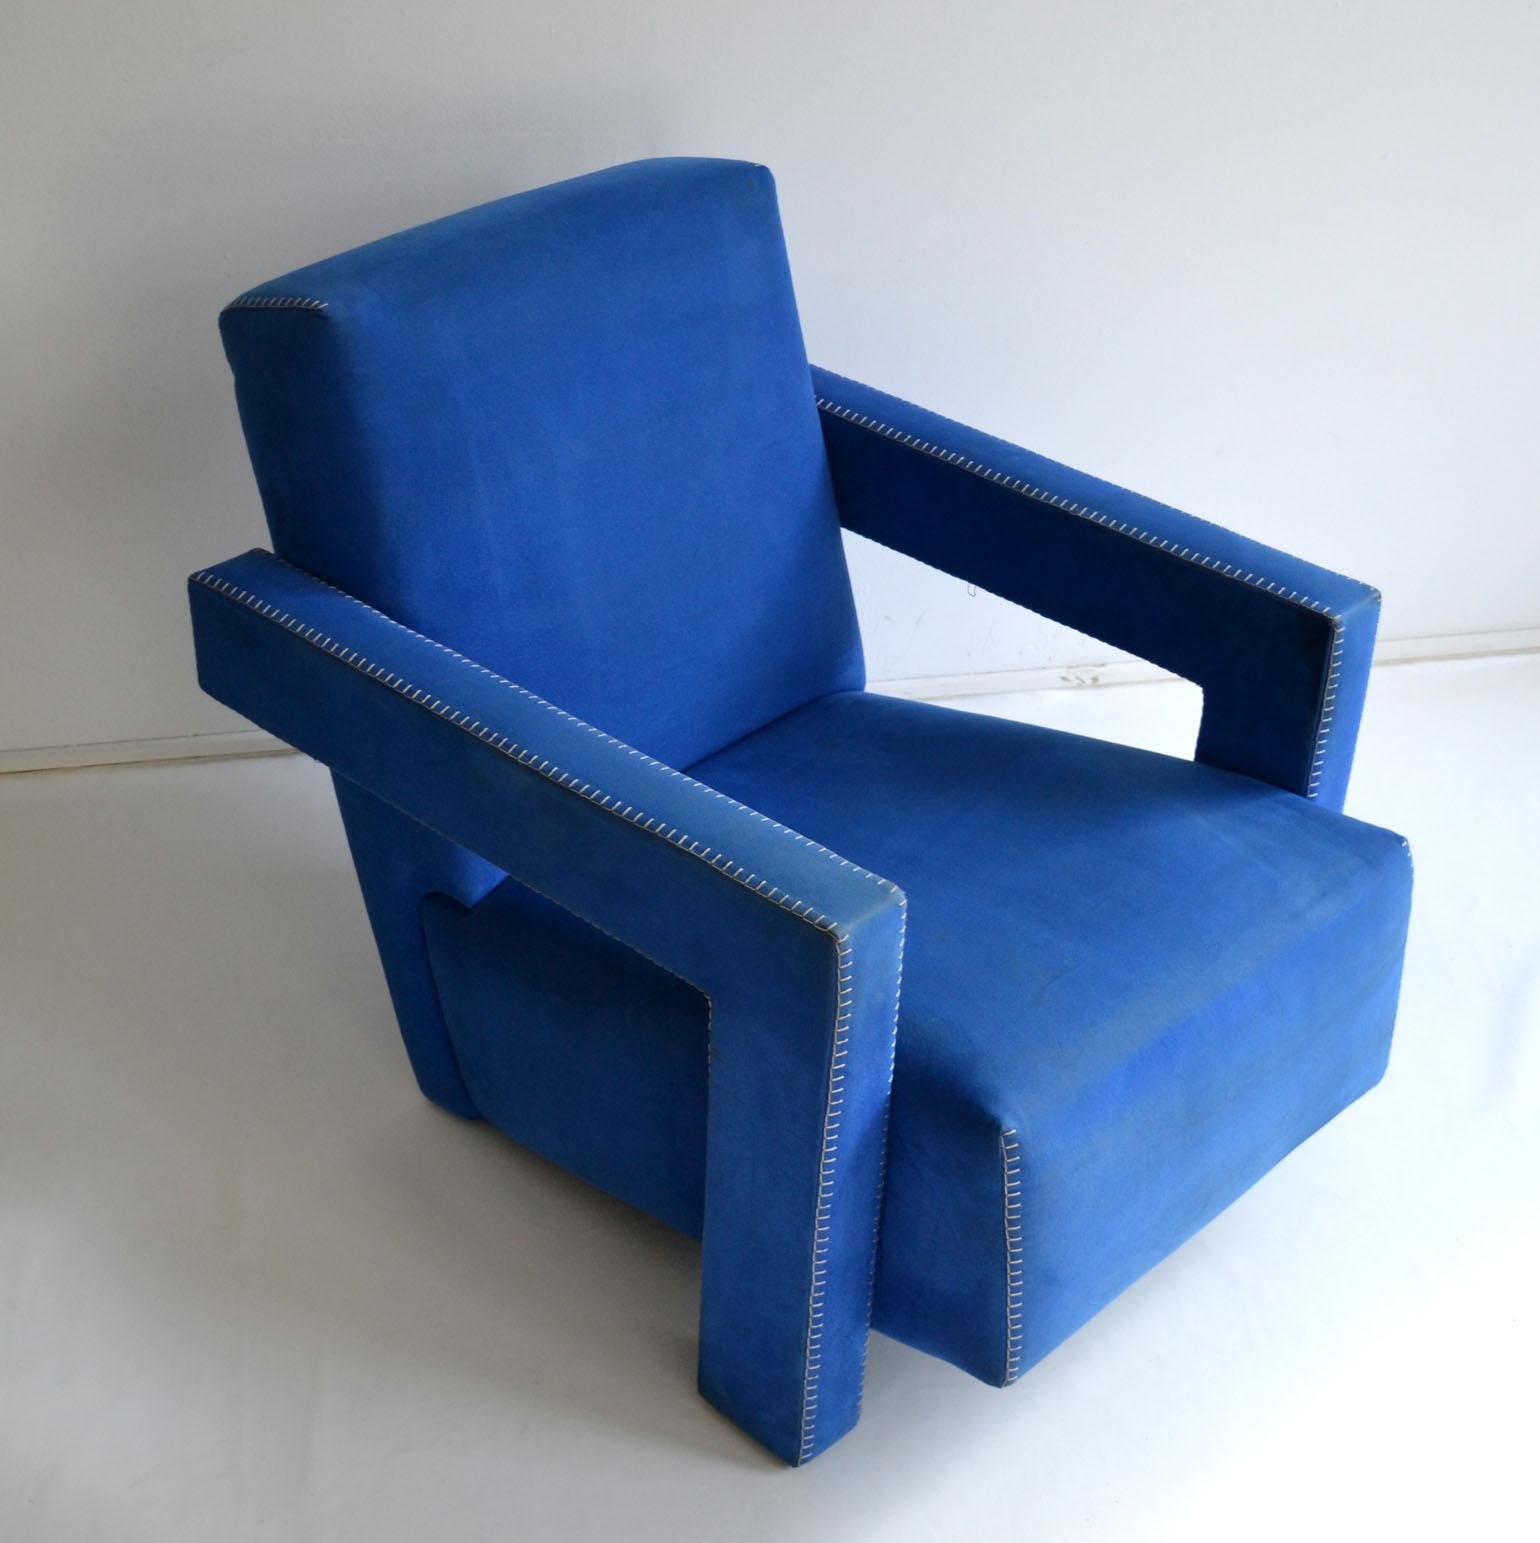 Vintage Gerrit Rietveld 'Utrecht 637' chair designed in 1935 and made by Cassina since the late 1980s. This chair retains the original blue alcantara fabric with ivory blanket stitch trim with original label and signature.
The Utrecht chair is one